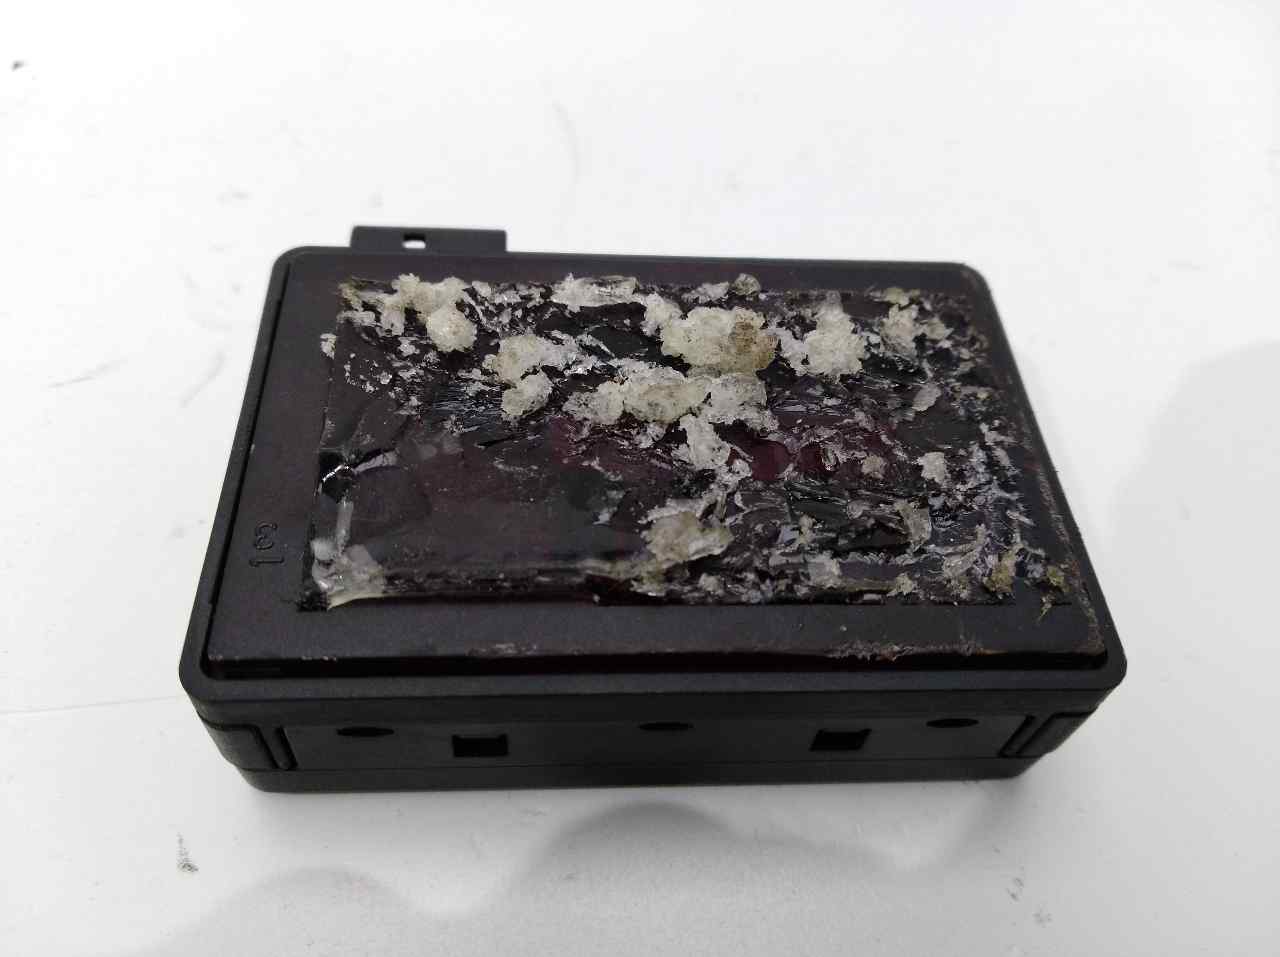 MERCEDES-BENZ M-Class W164 (2005-2011) Other Control Units 1648203085, 1648203085, 1648203085 24512546